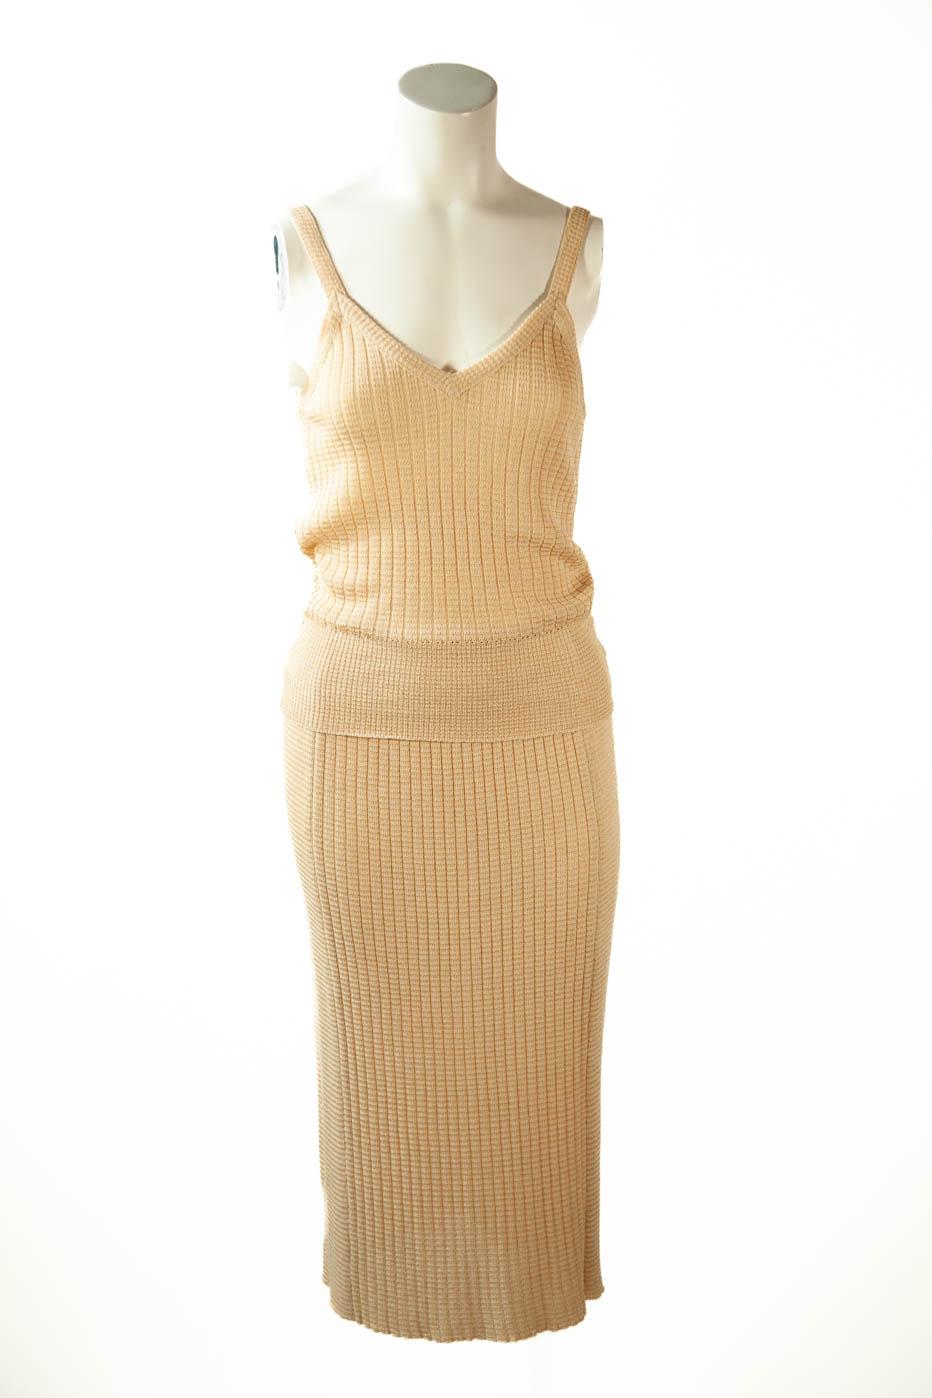 Missoni, Museum Documented Ensemble, Camisole, Skirt and Cardigan, 1973 In Excellent Condition For Sale In Kingston, NY